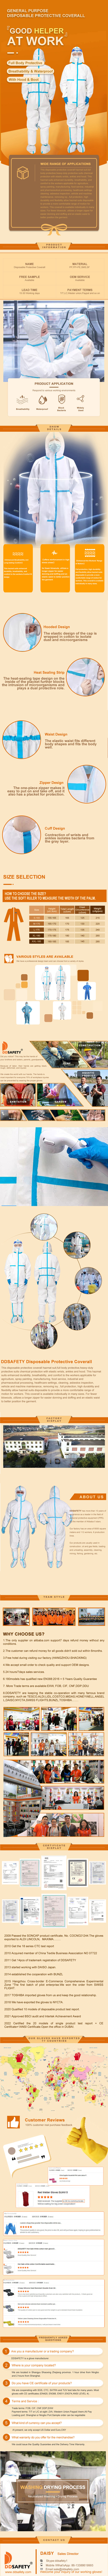 Coverall - Disposable Nonwoven PPE Protective Coverall Hazmat Suit - DNC416 Coverall - Disposable Nonwoven PPE Protective Coverall Hazmat Suit - DNC416 Coverall,Disposable Coverall,Hazmat suit